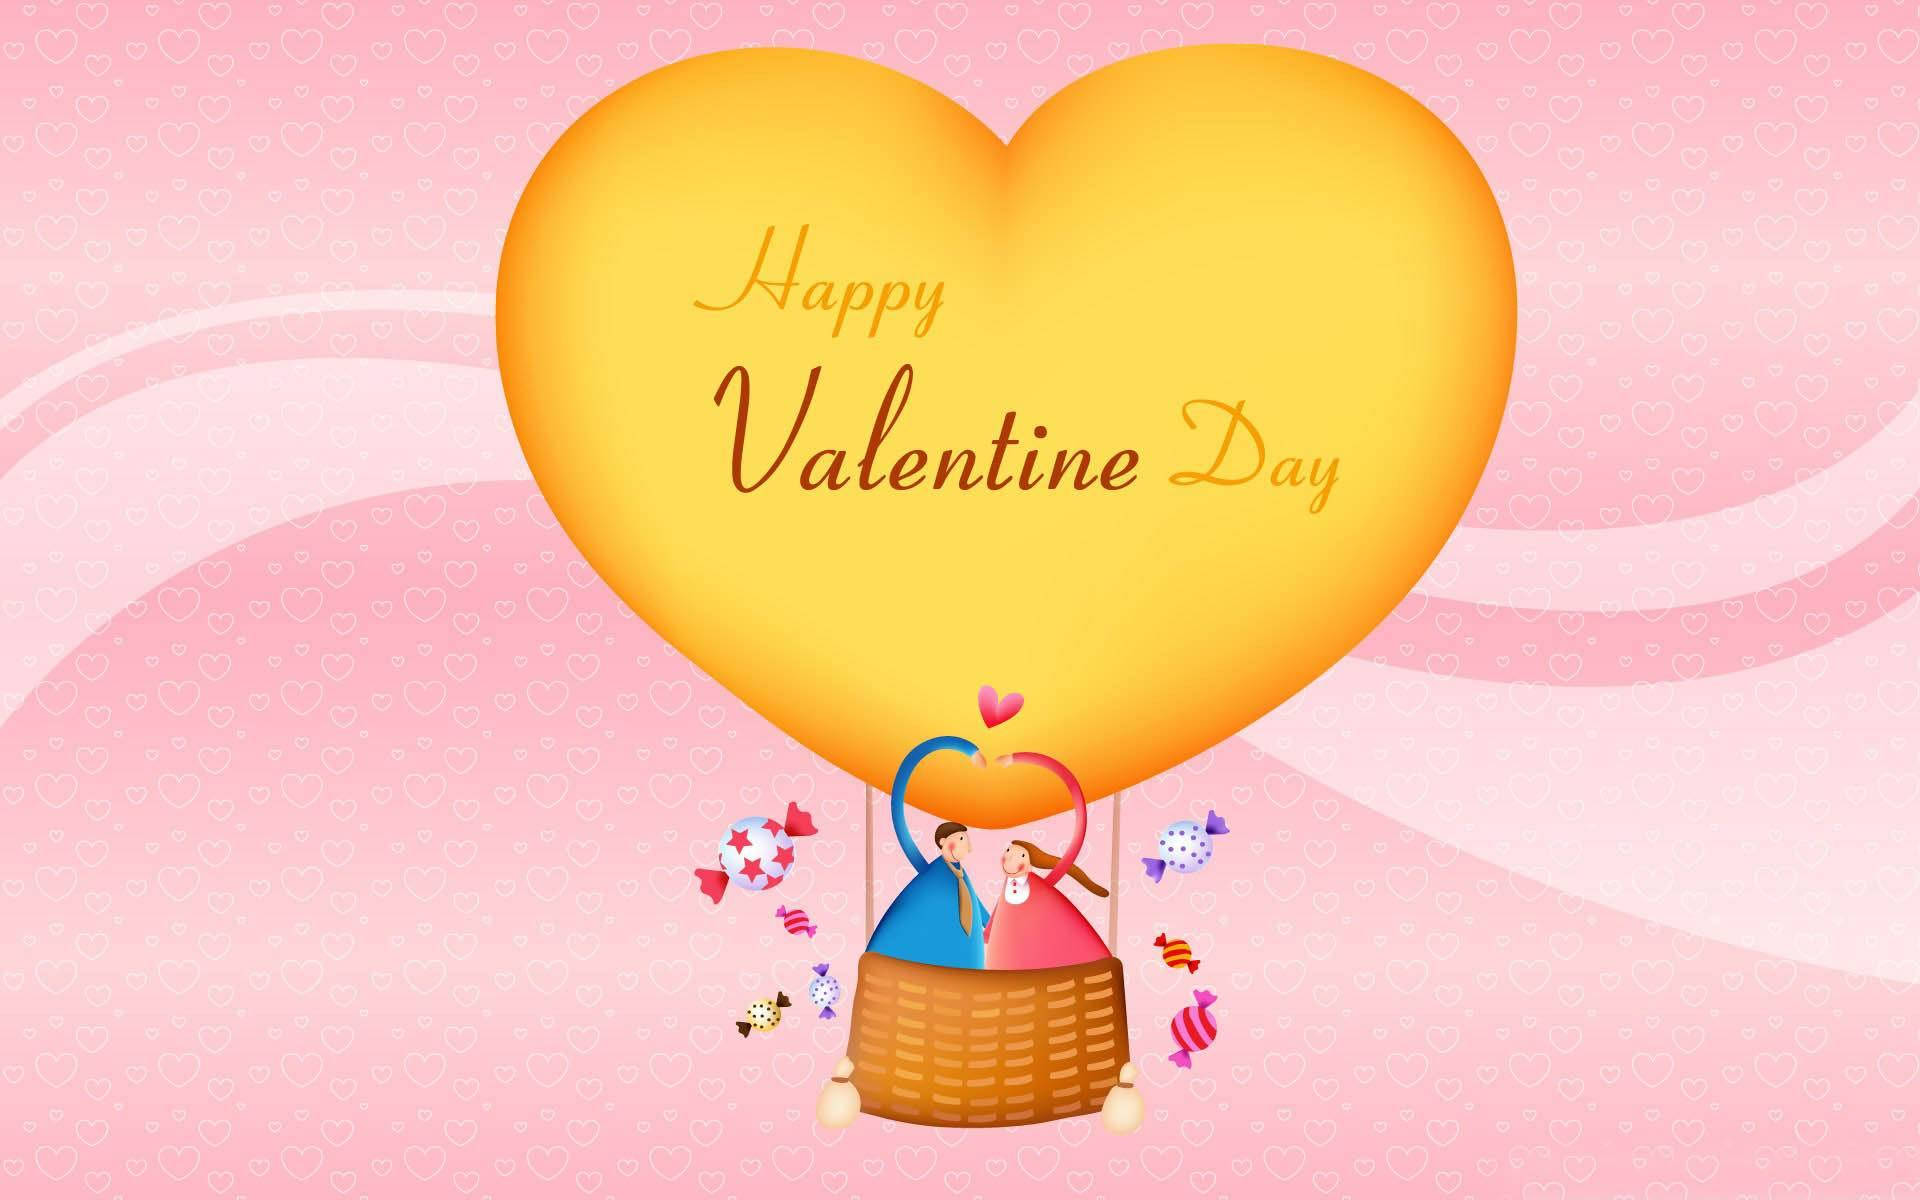 Download Cute Valentine's Day Yellow Heart Balloon Wallpaper